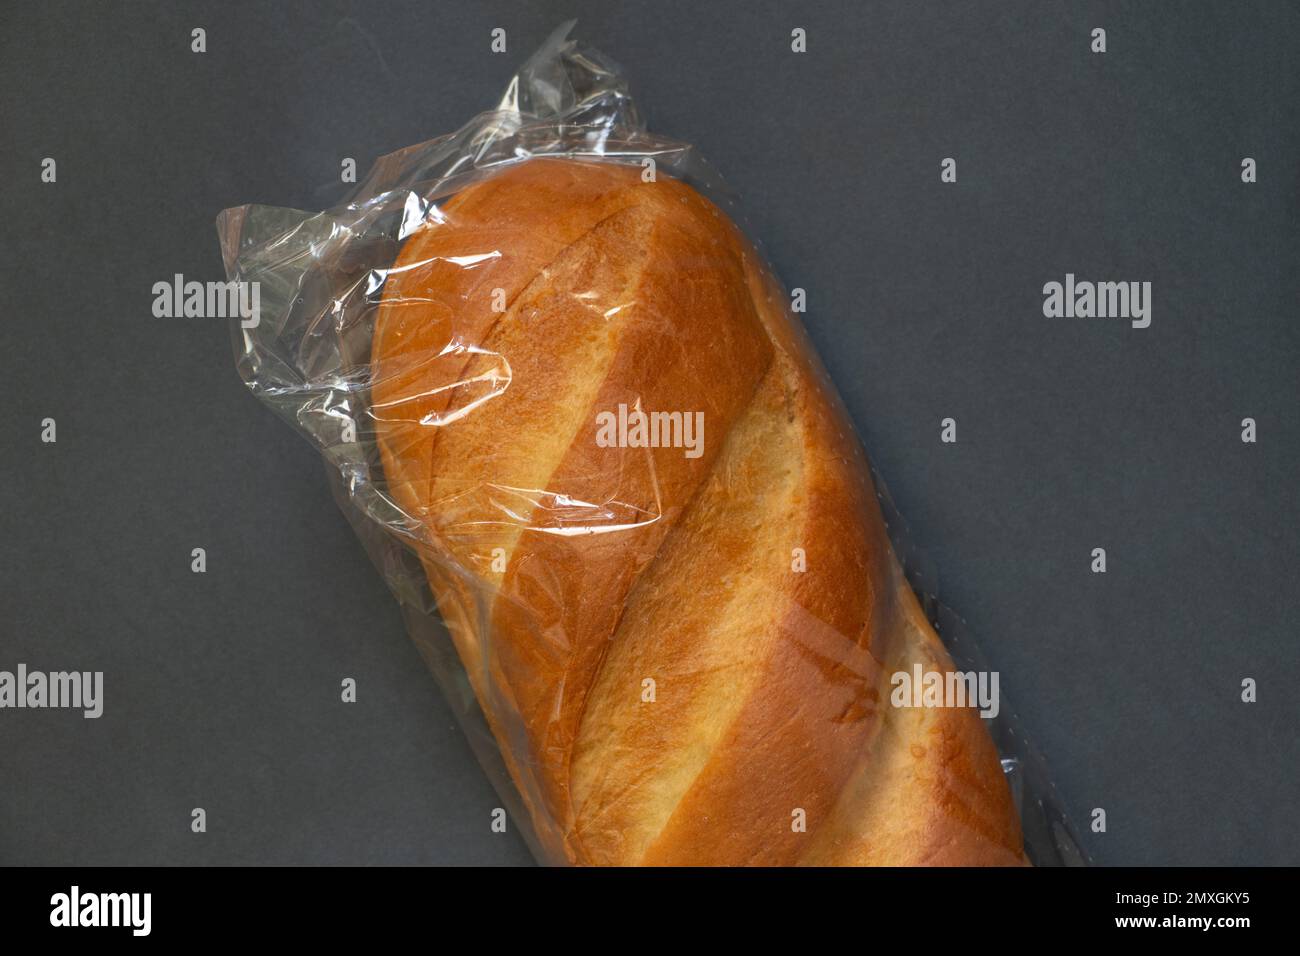 loaf of white bread in packaging on a dark isolated background close-up Stock Photo